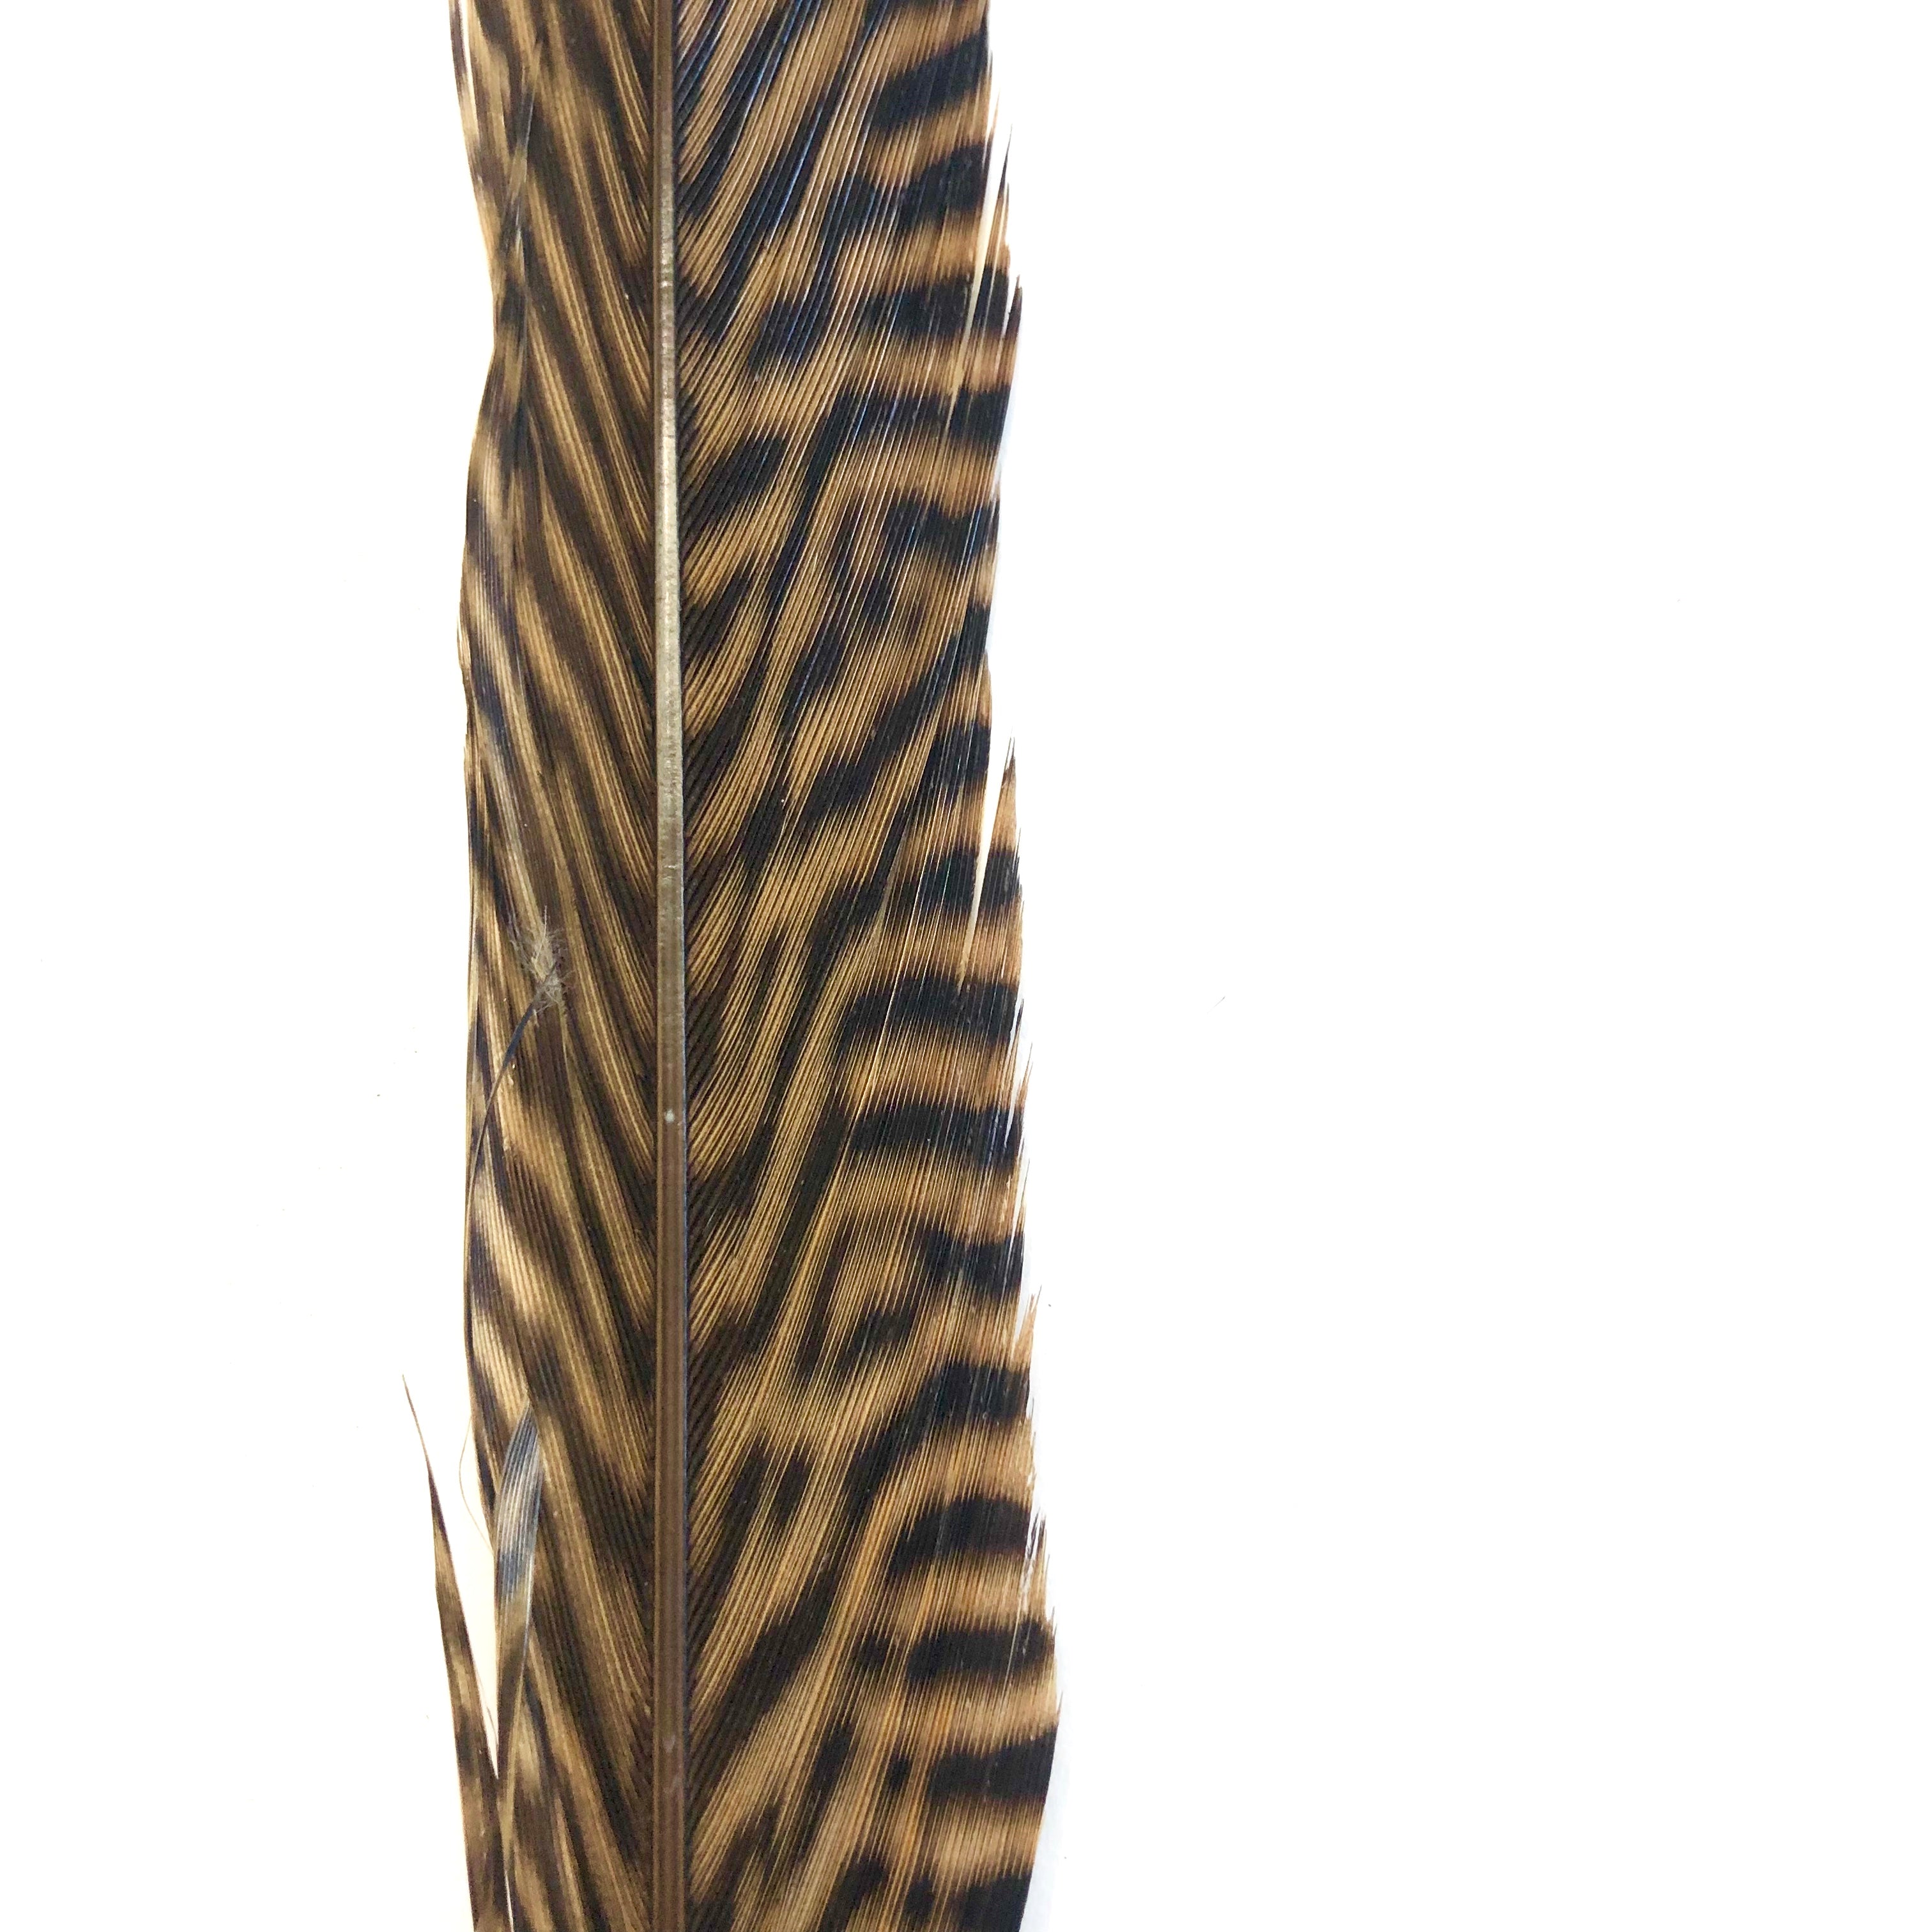 10" to 20" Golden Pheasant Side Tail Feather - Natural ((SECONDS))